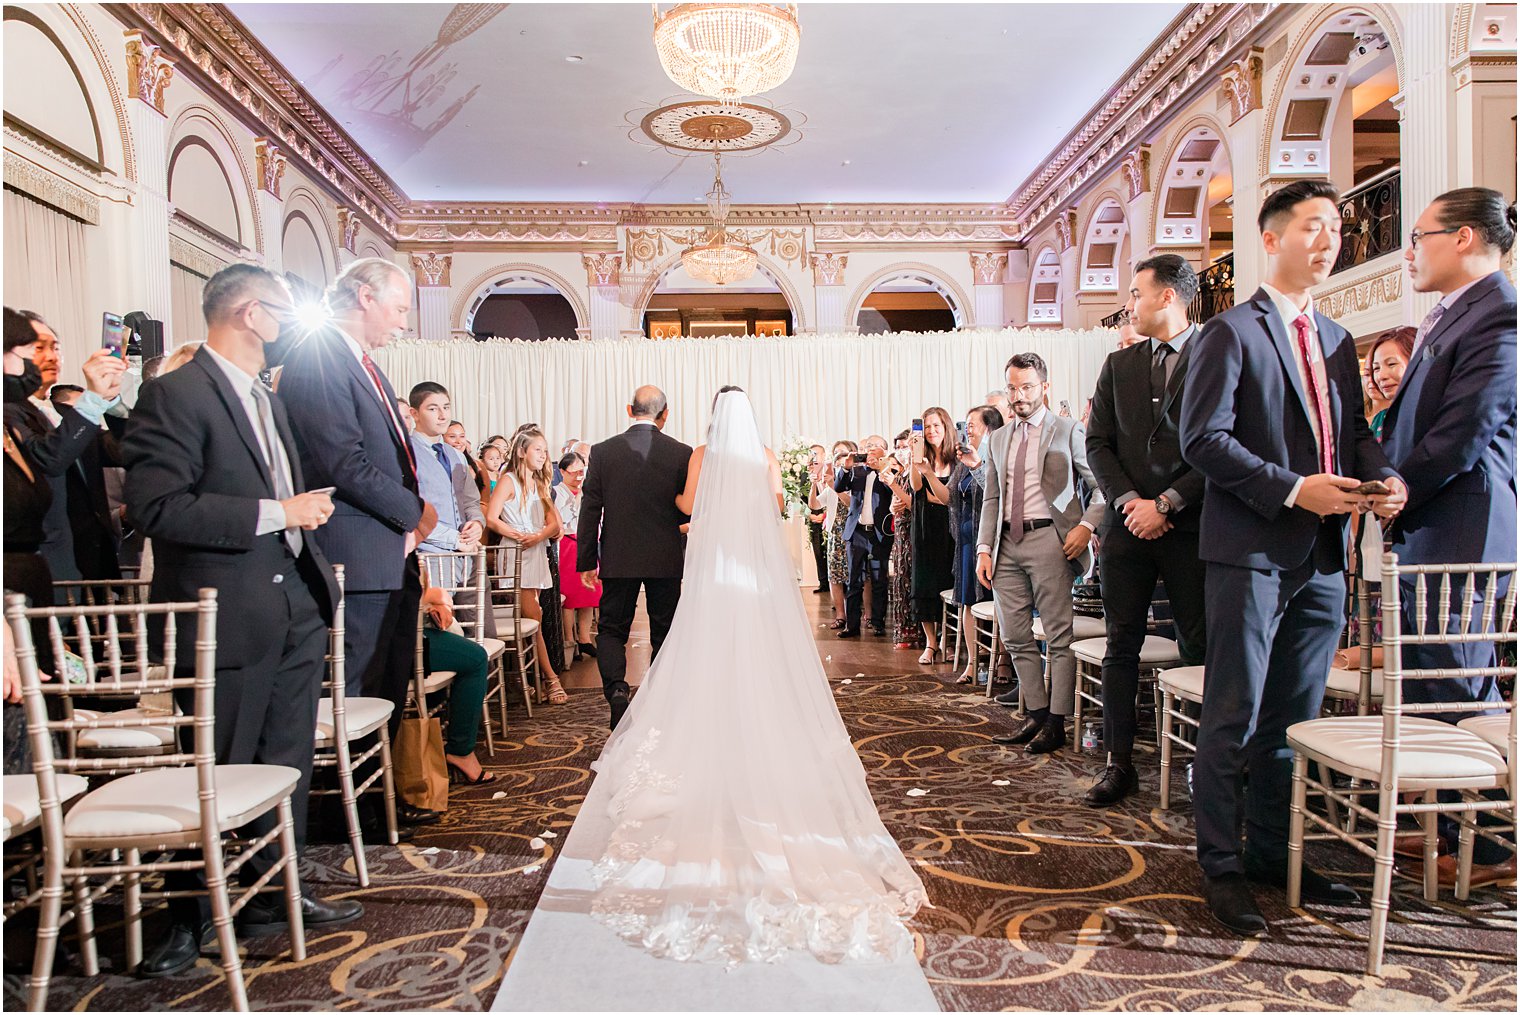 bride walks down aisle with veil behind her during ceremony at the Ballroom at the Ben